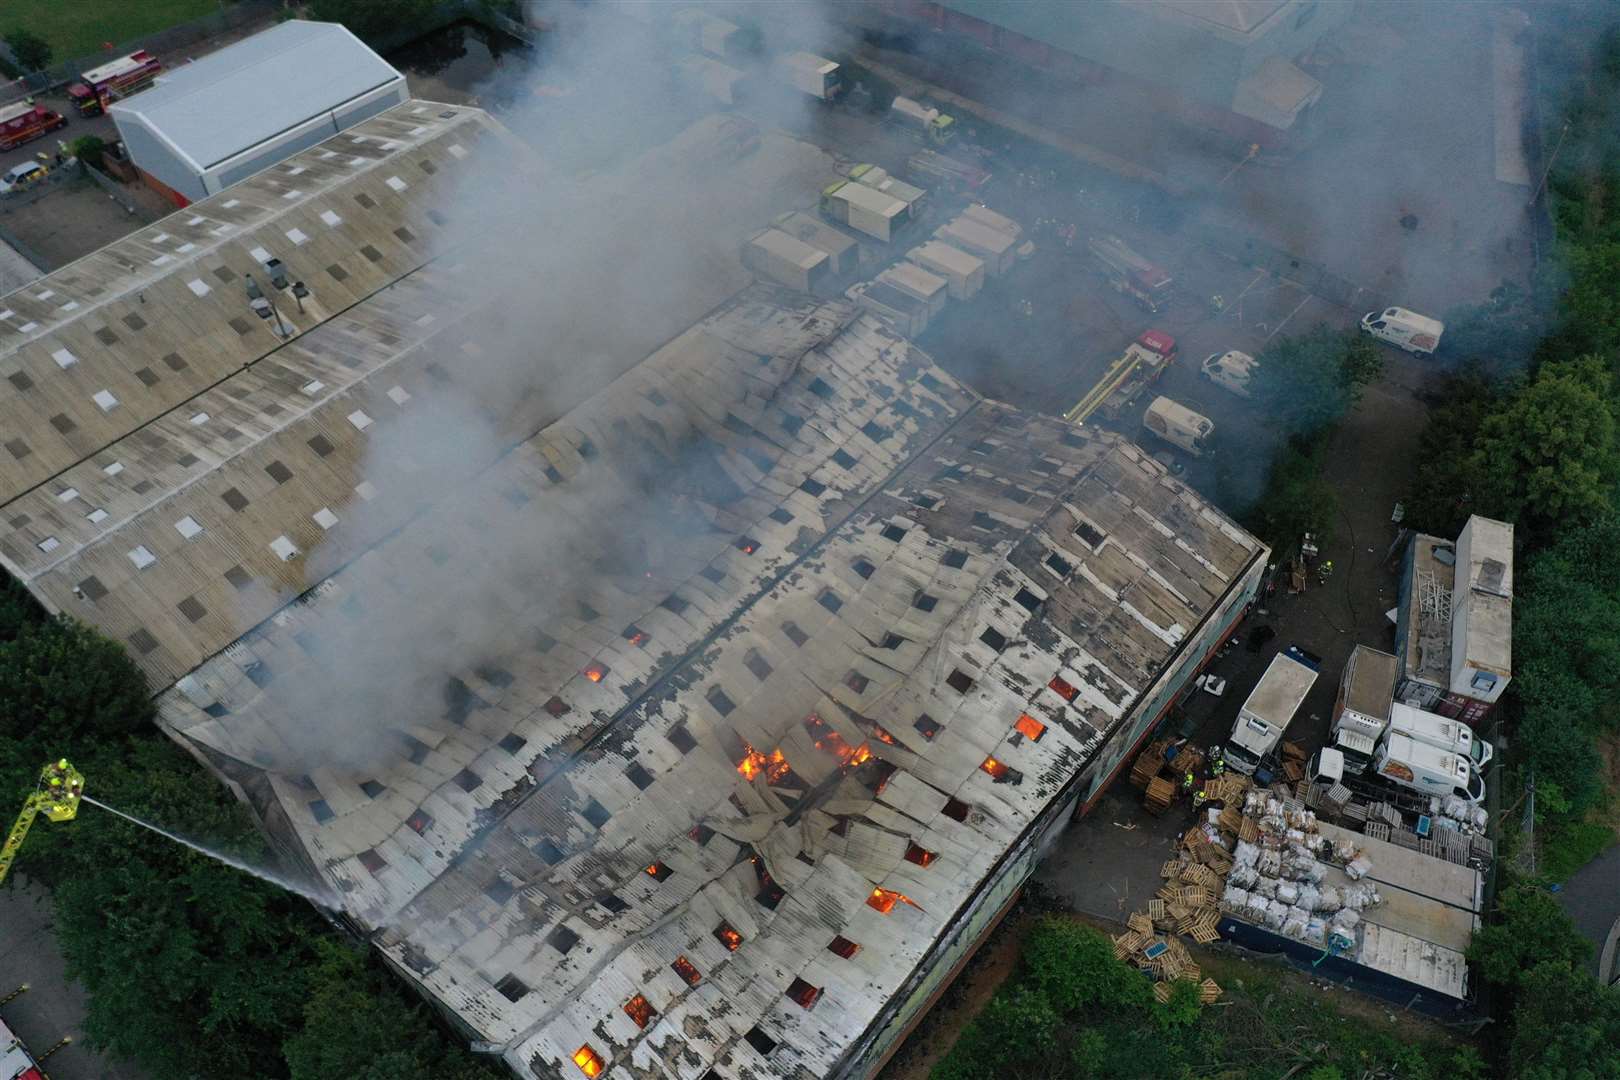 Flames tore through the entire unit Picture: UKNIP